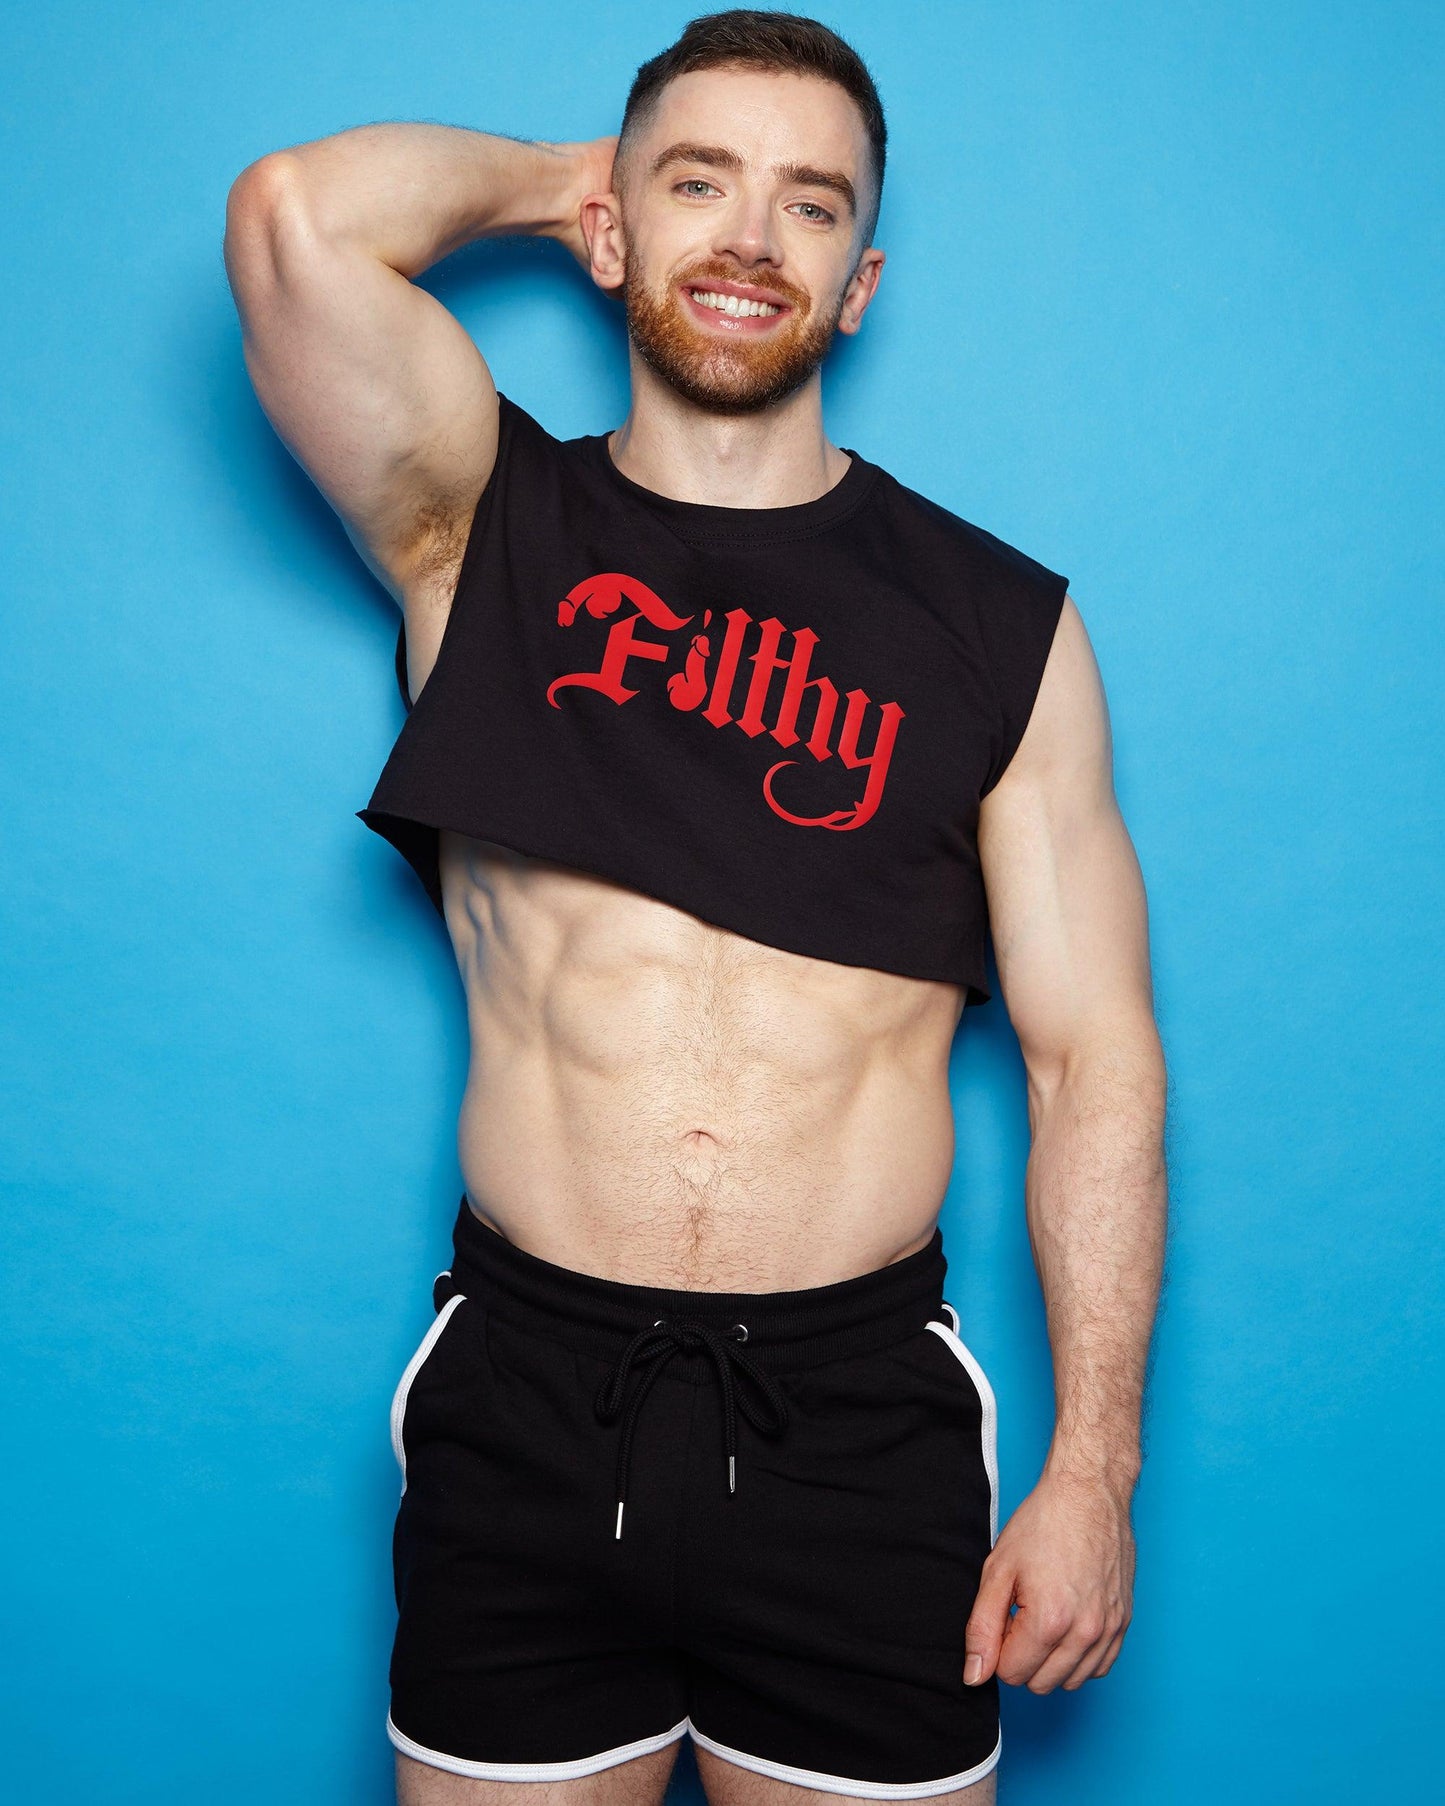 Filthy, red on black - sleeveless crop top.